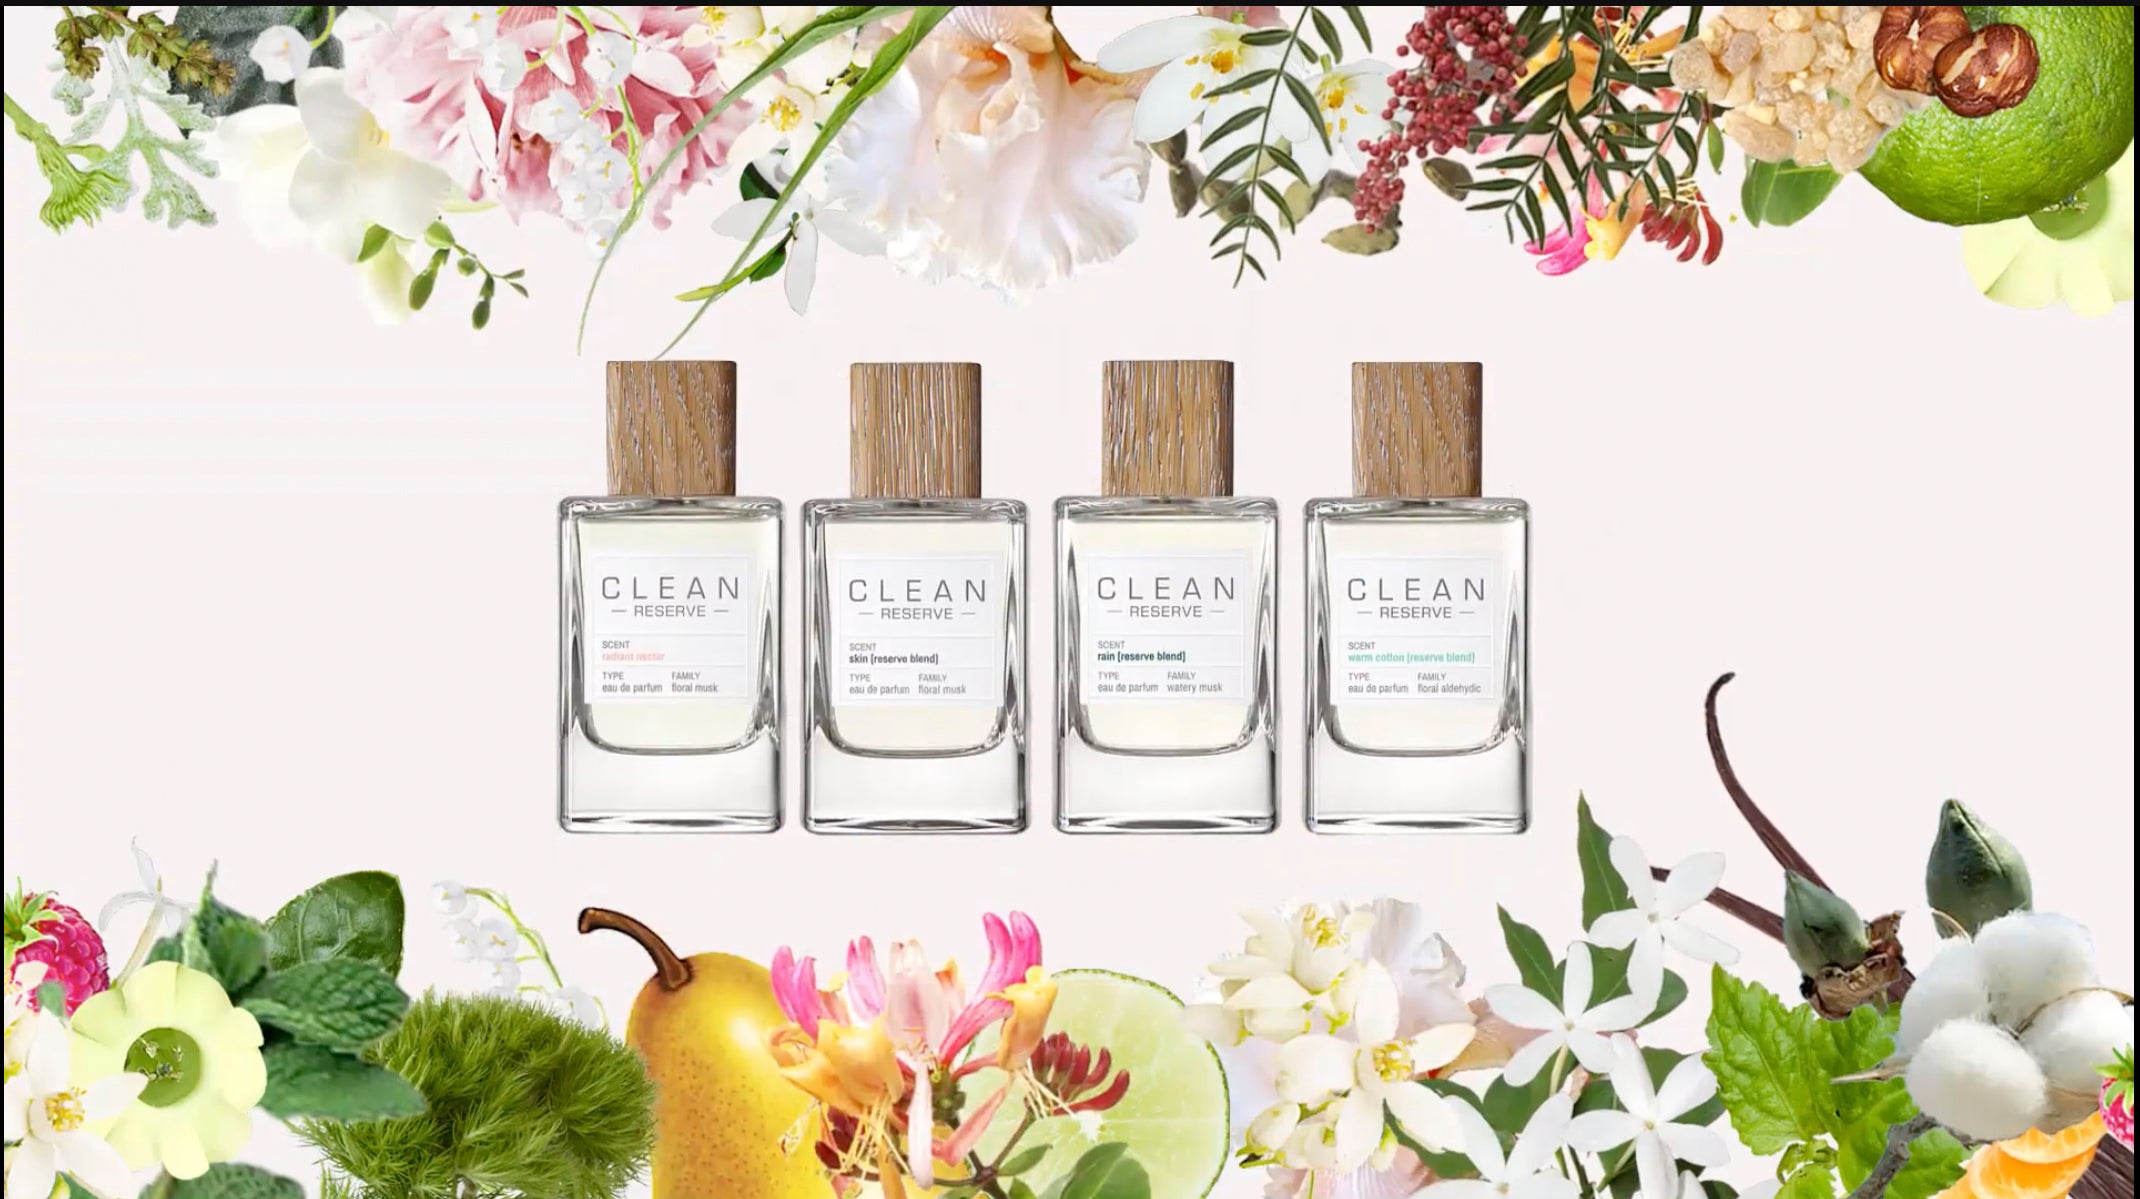 Load video: We are Clean Beauty Collective